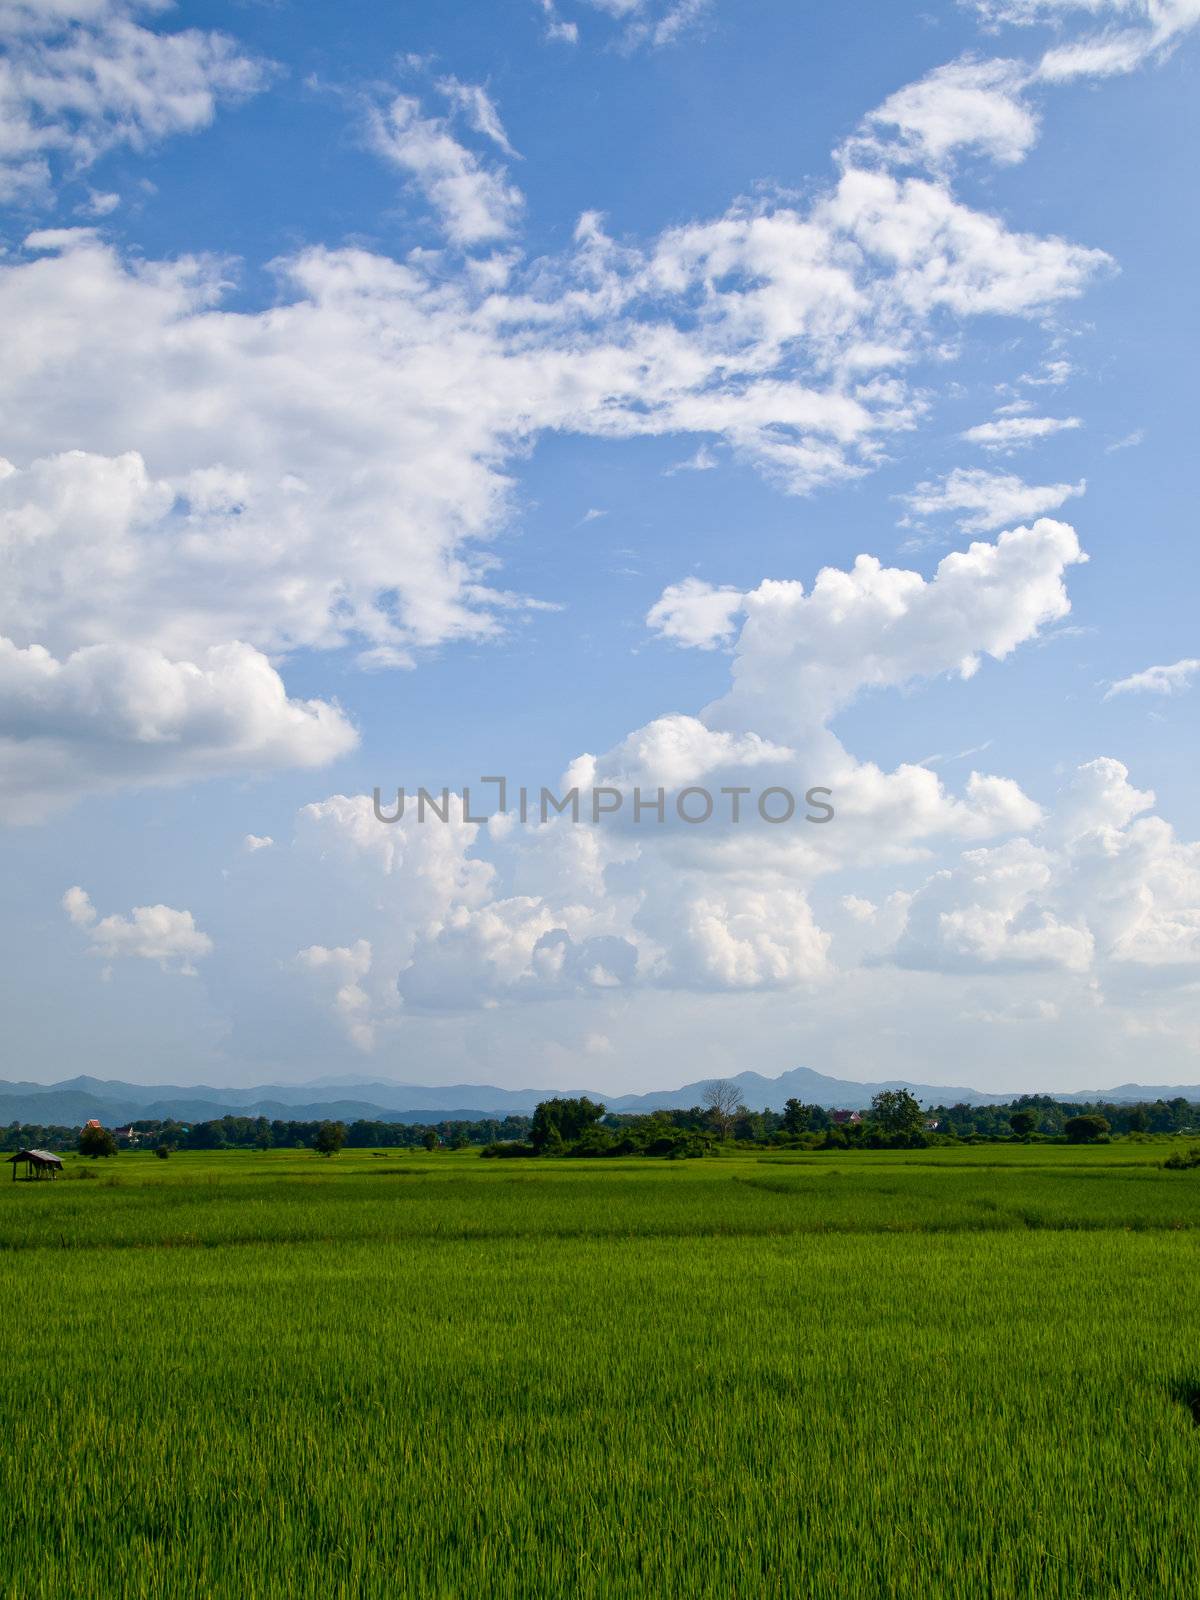 Rice field with blue sky